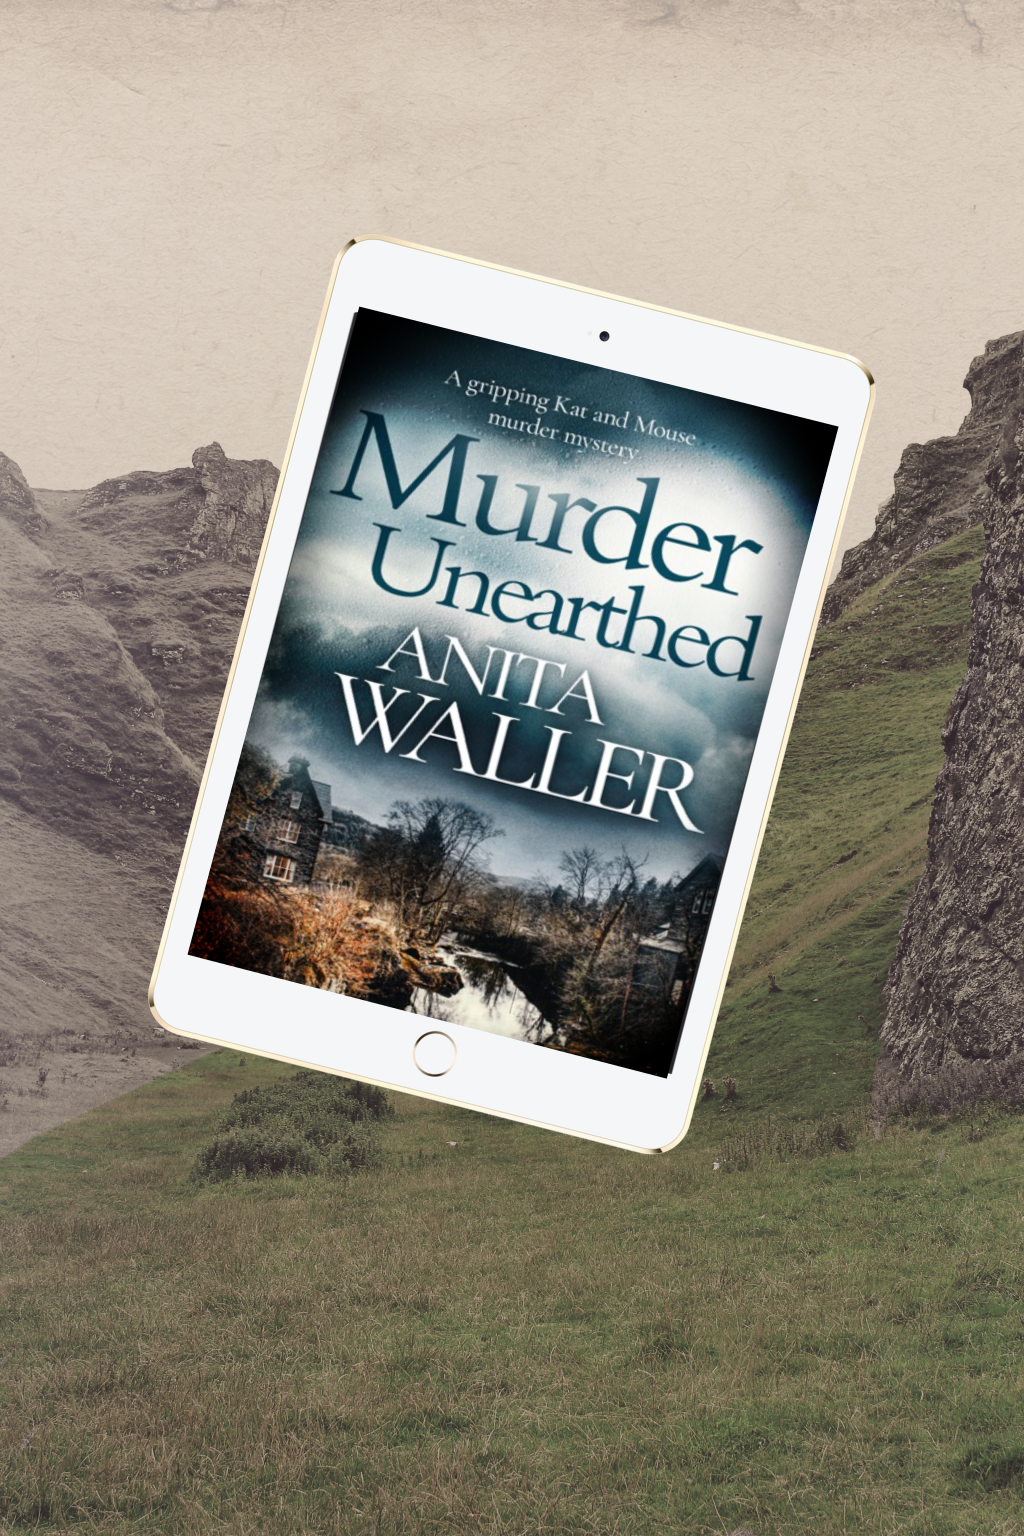 Murder Unearthed by Anita Waller – Book Review